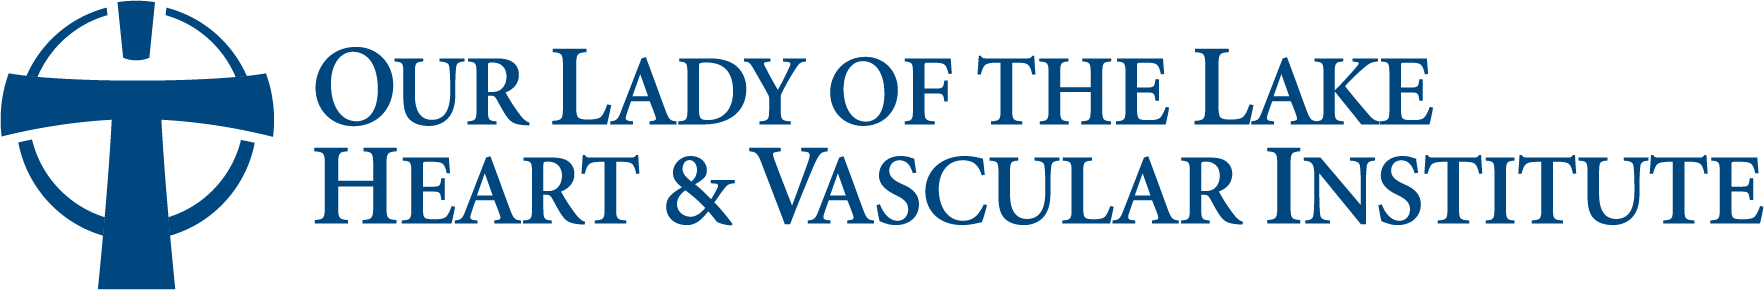 Our Lady of the Lake Heart and Vascular Institute Sponsor Logo 